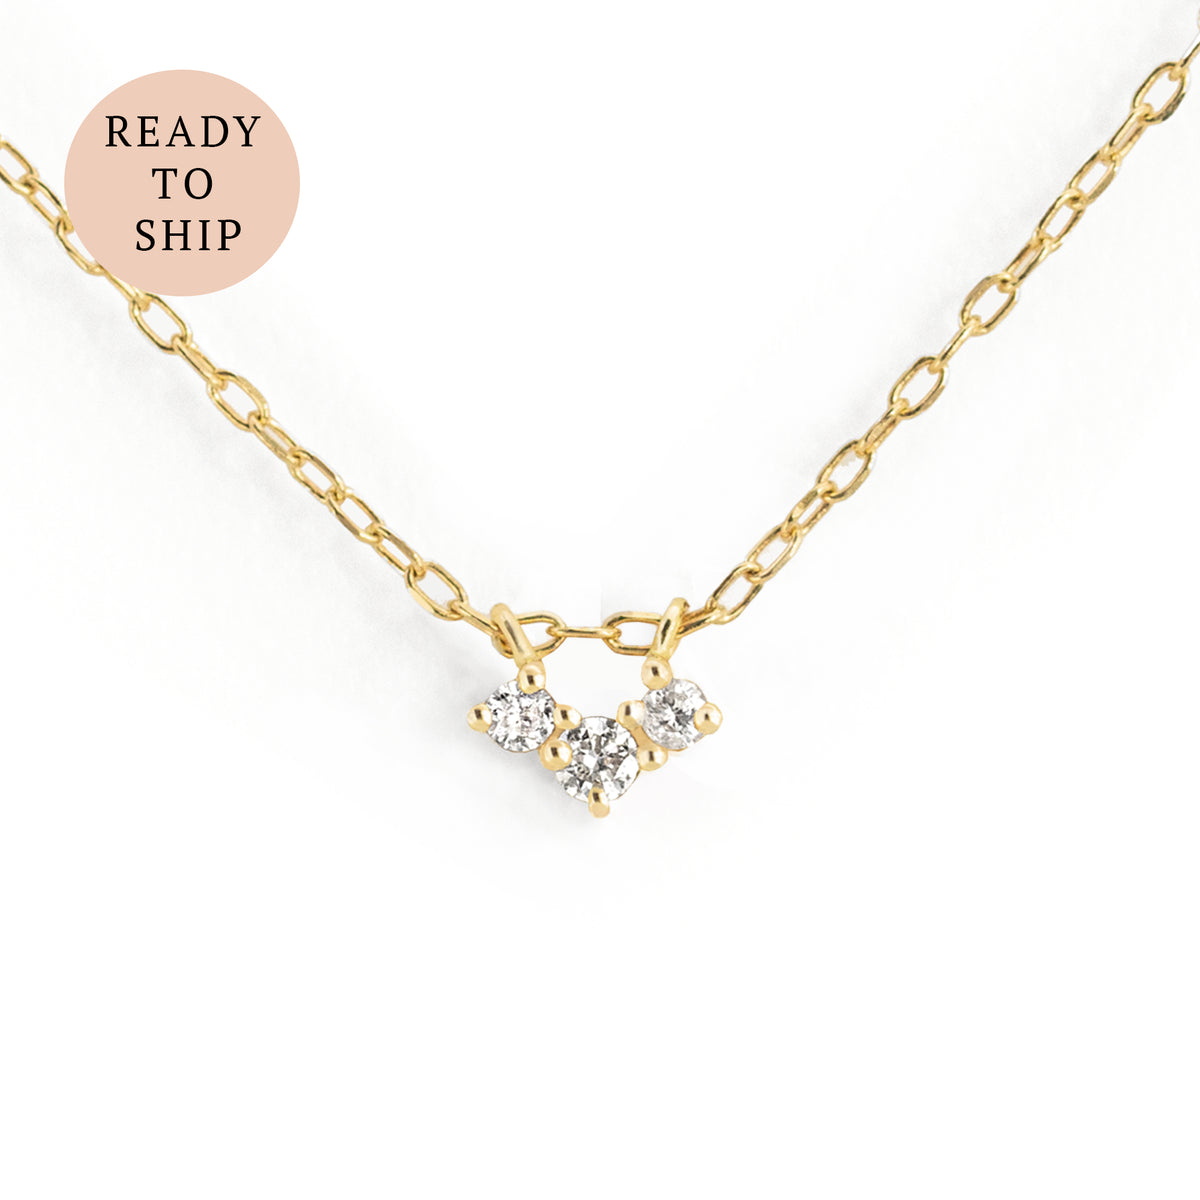 Jamie Park Jewelry - Three Diamond Necklace - Upgrade everyday looks with this classic dainty three diamond necklace. Perfect for day or night, this piece is perfect for wearing on special occasions or adding a touch of sparkles to your everyday look.